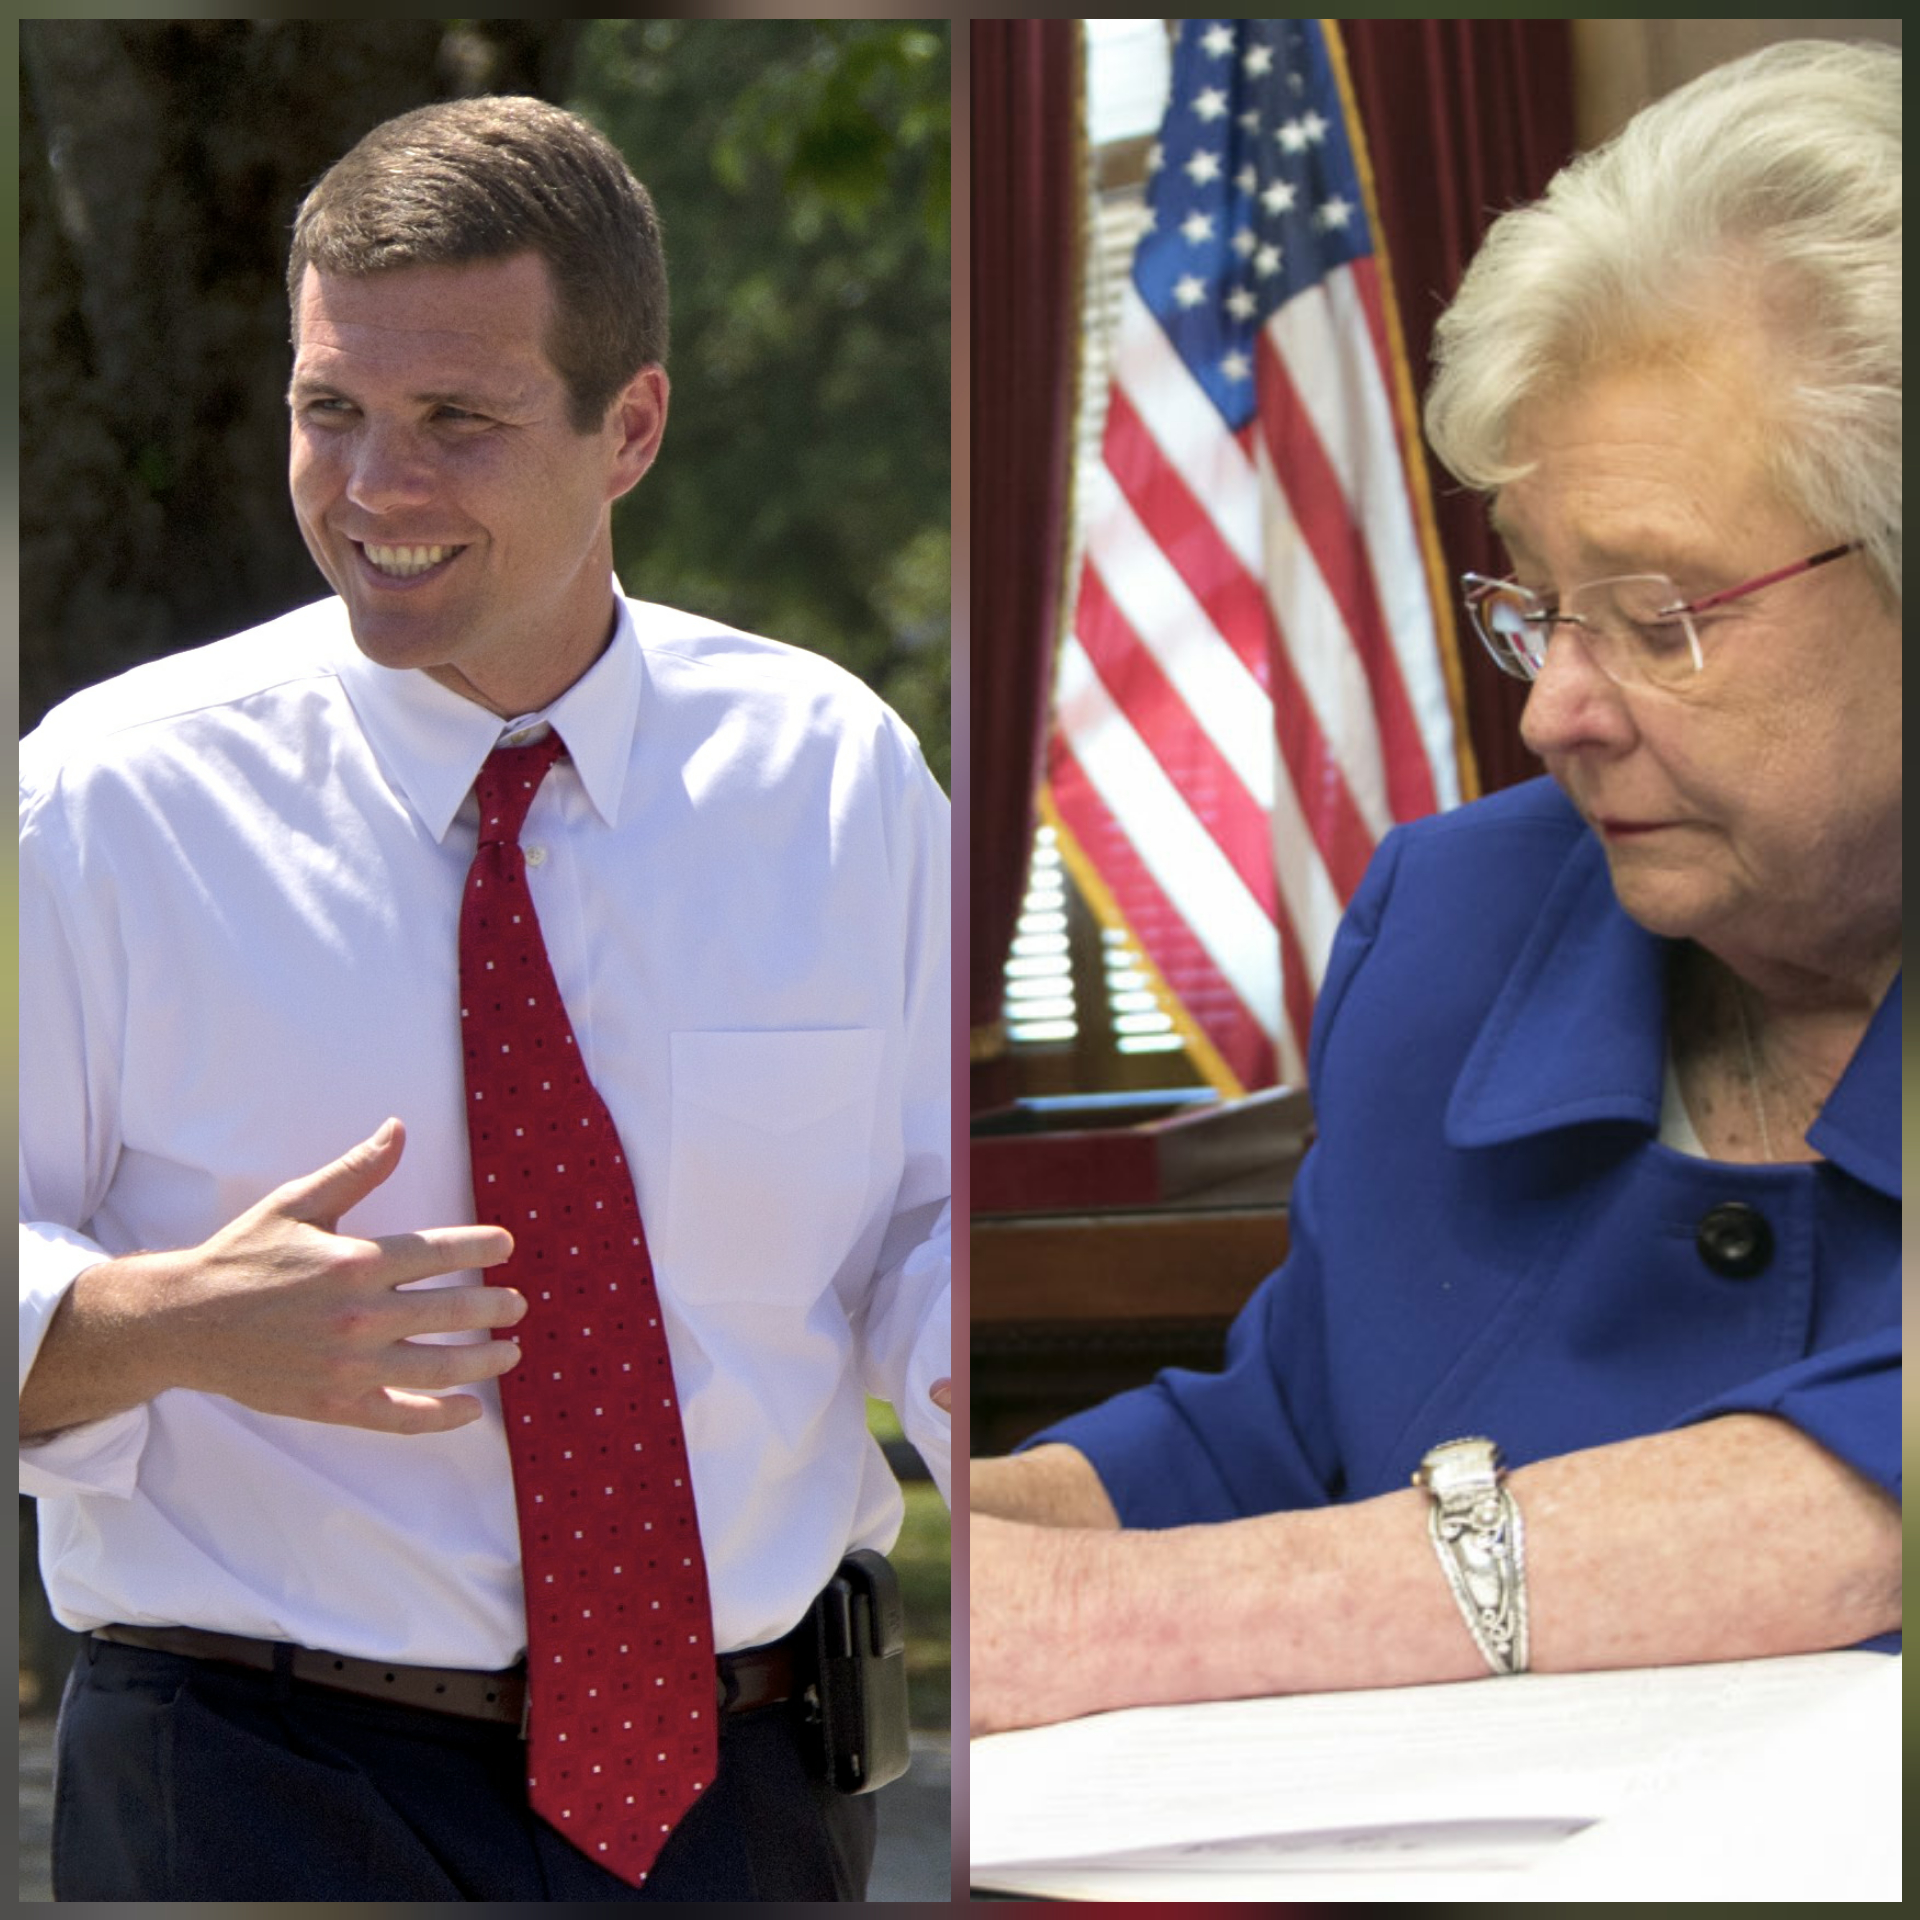 Kay Ivey wins Republican nomination for governor, Walt Maddox nominated as Democratic candidate